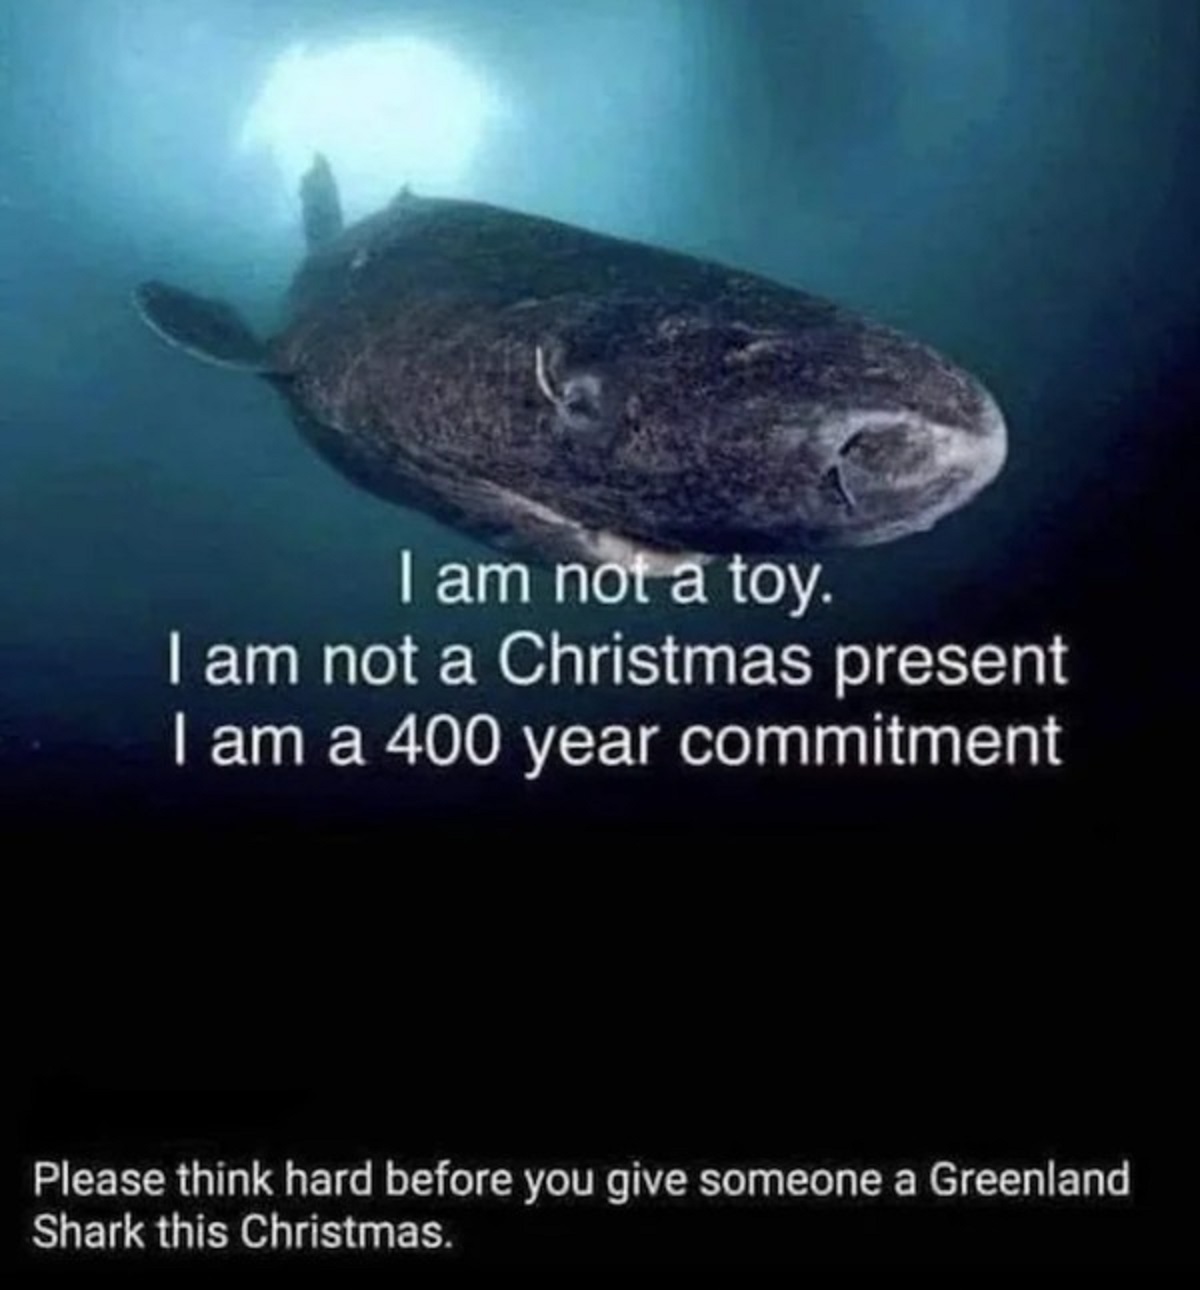 am not a toy i am not a christm - I am not a toy. I am not a Christmas present I am a 400 year commitment Please think hard before you give someone a Greenland Shark this Christmas.